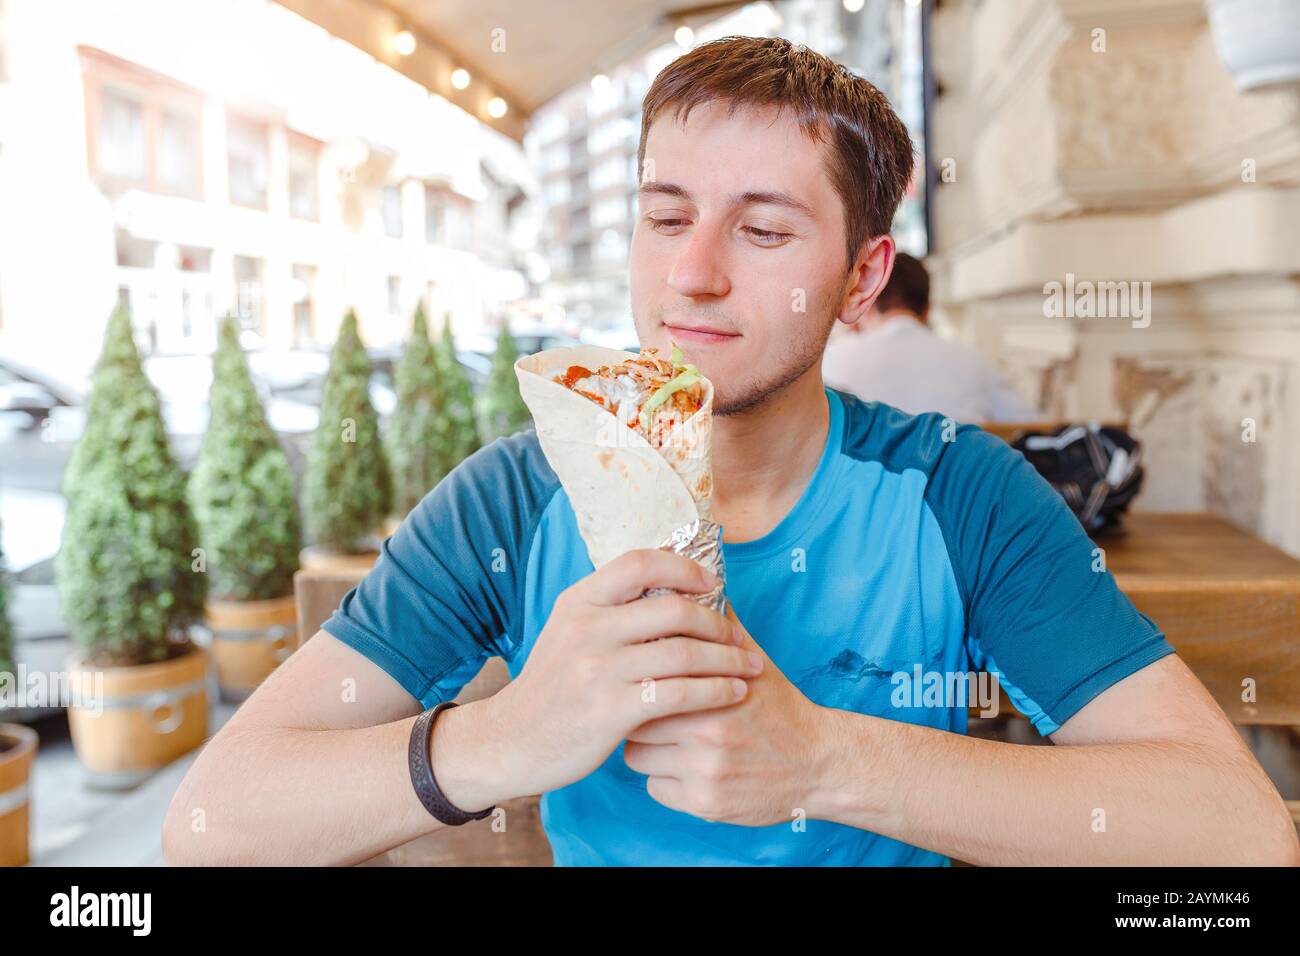 Man eating Doner Kebap its a midlle eastern fast food cuisine Stock Photo